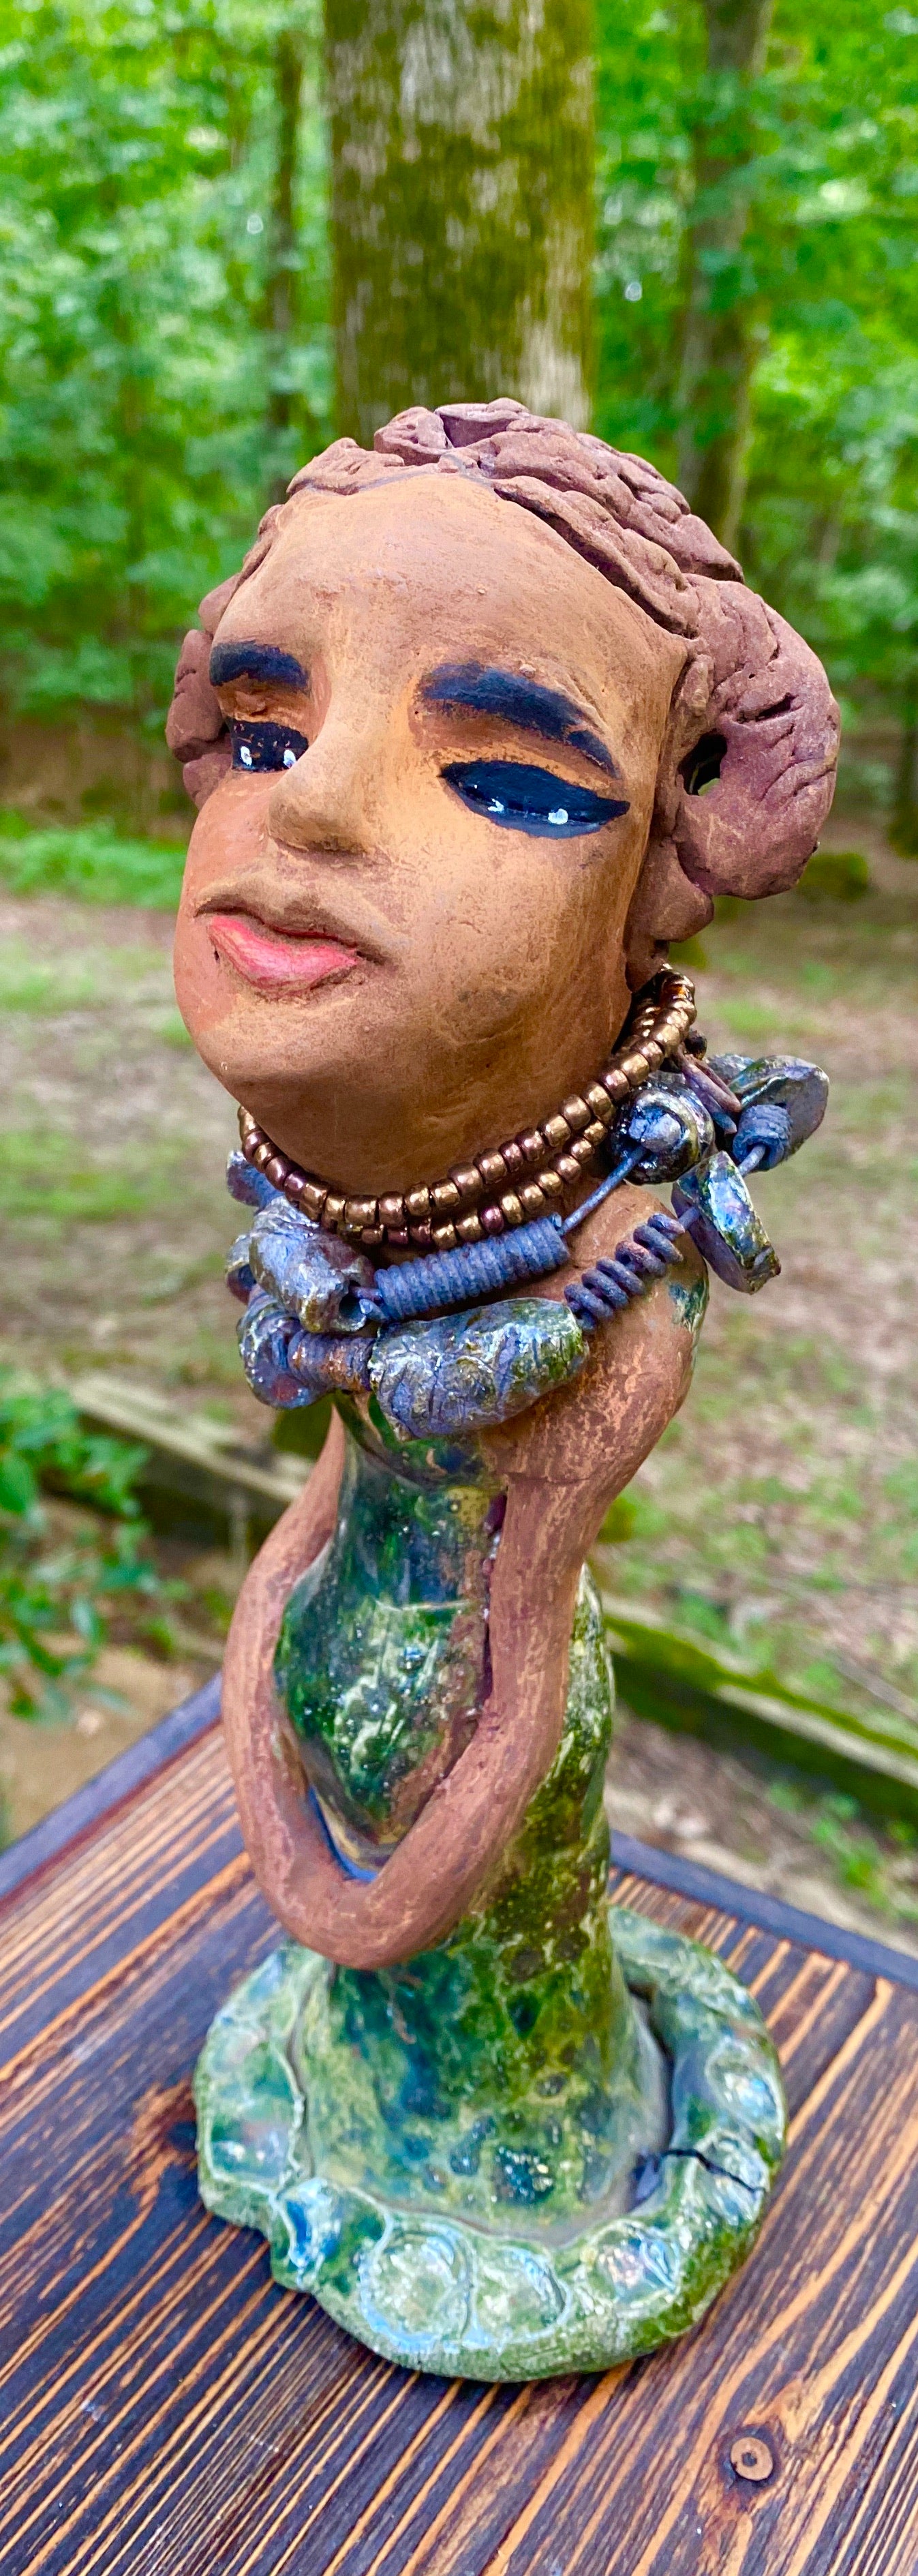 Greta! Greta stands 11" x 4" x 4" and weighs 2.5 lbs. She has a lovely honey brown complexion with  reddish brown lips. She has a braided hairstyle.  Gretaya has a colorful metallic green antique copper glazed dress. She wears two raku beaded necklaces. With long eyes slightly opened, Greta has hopes of finding a new home.